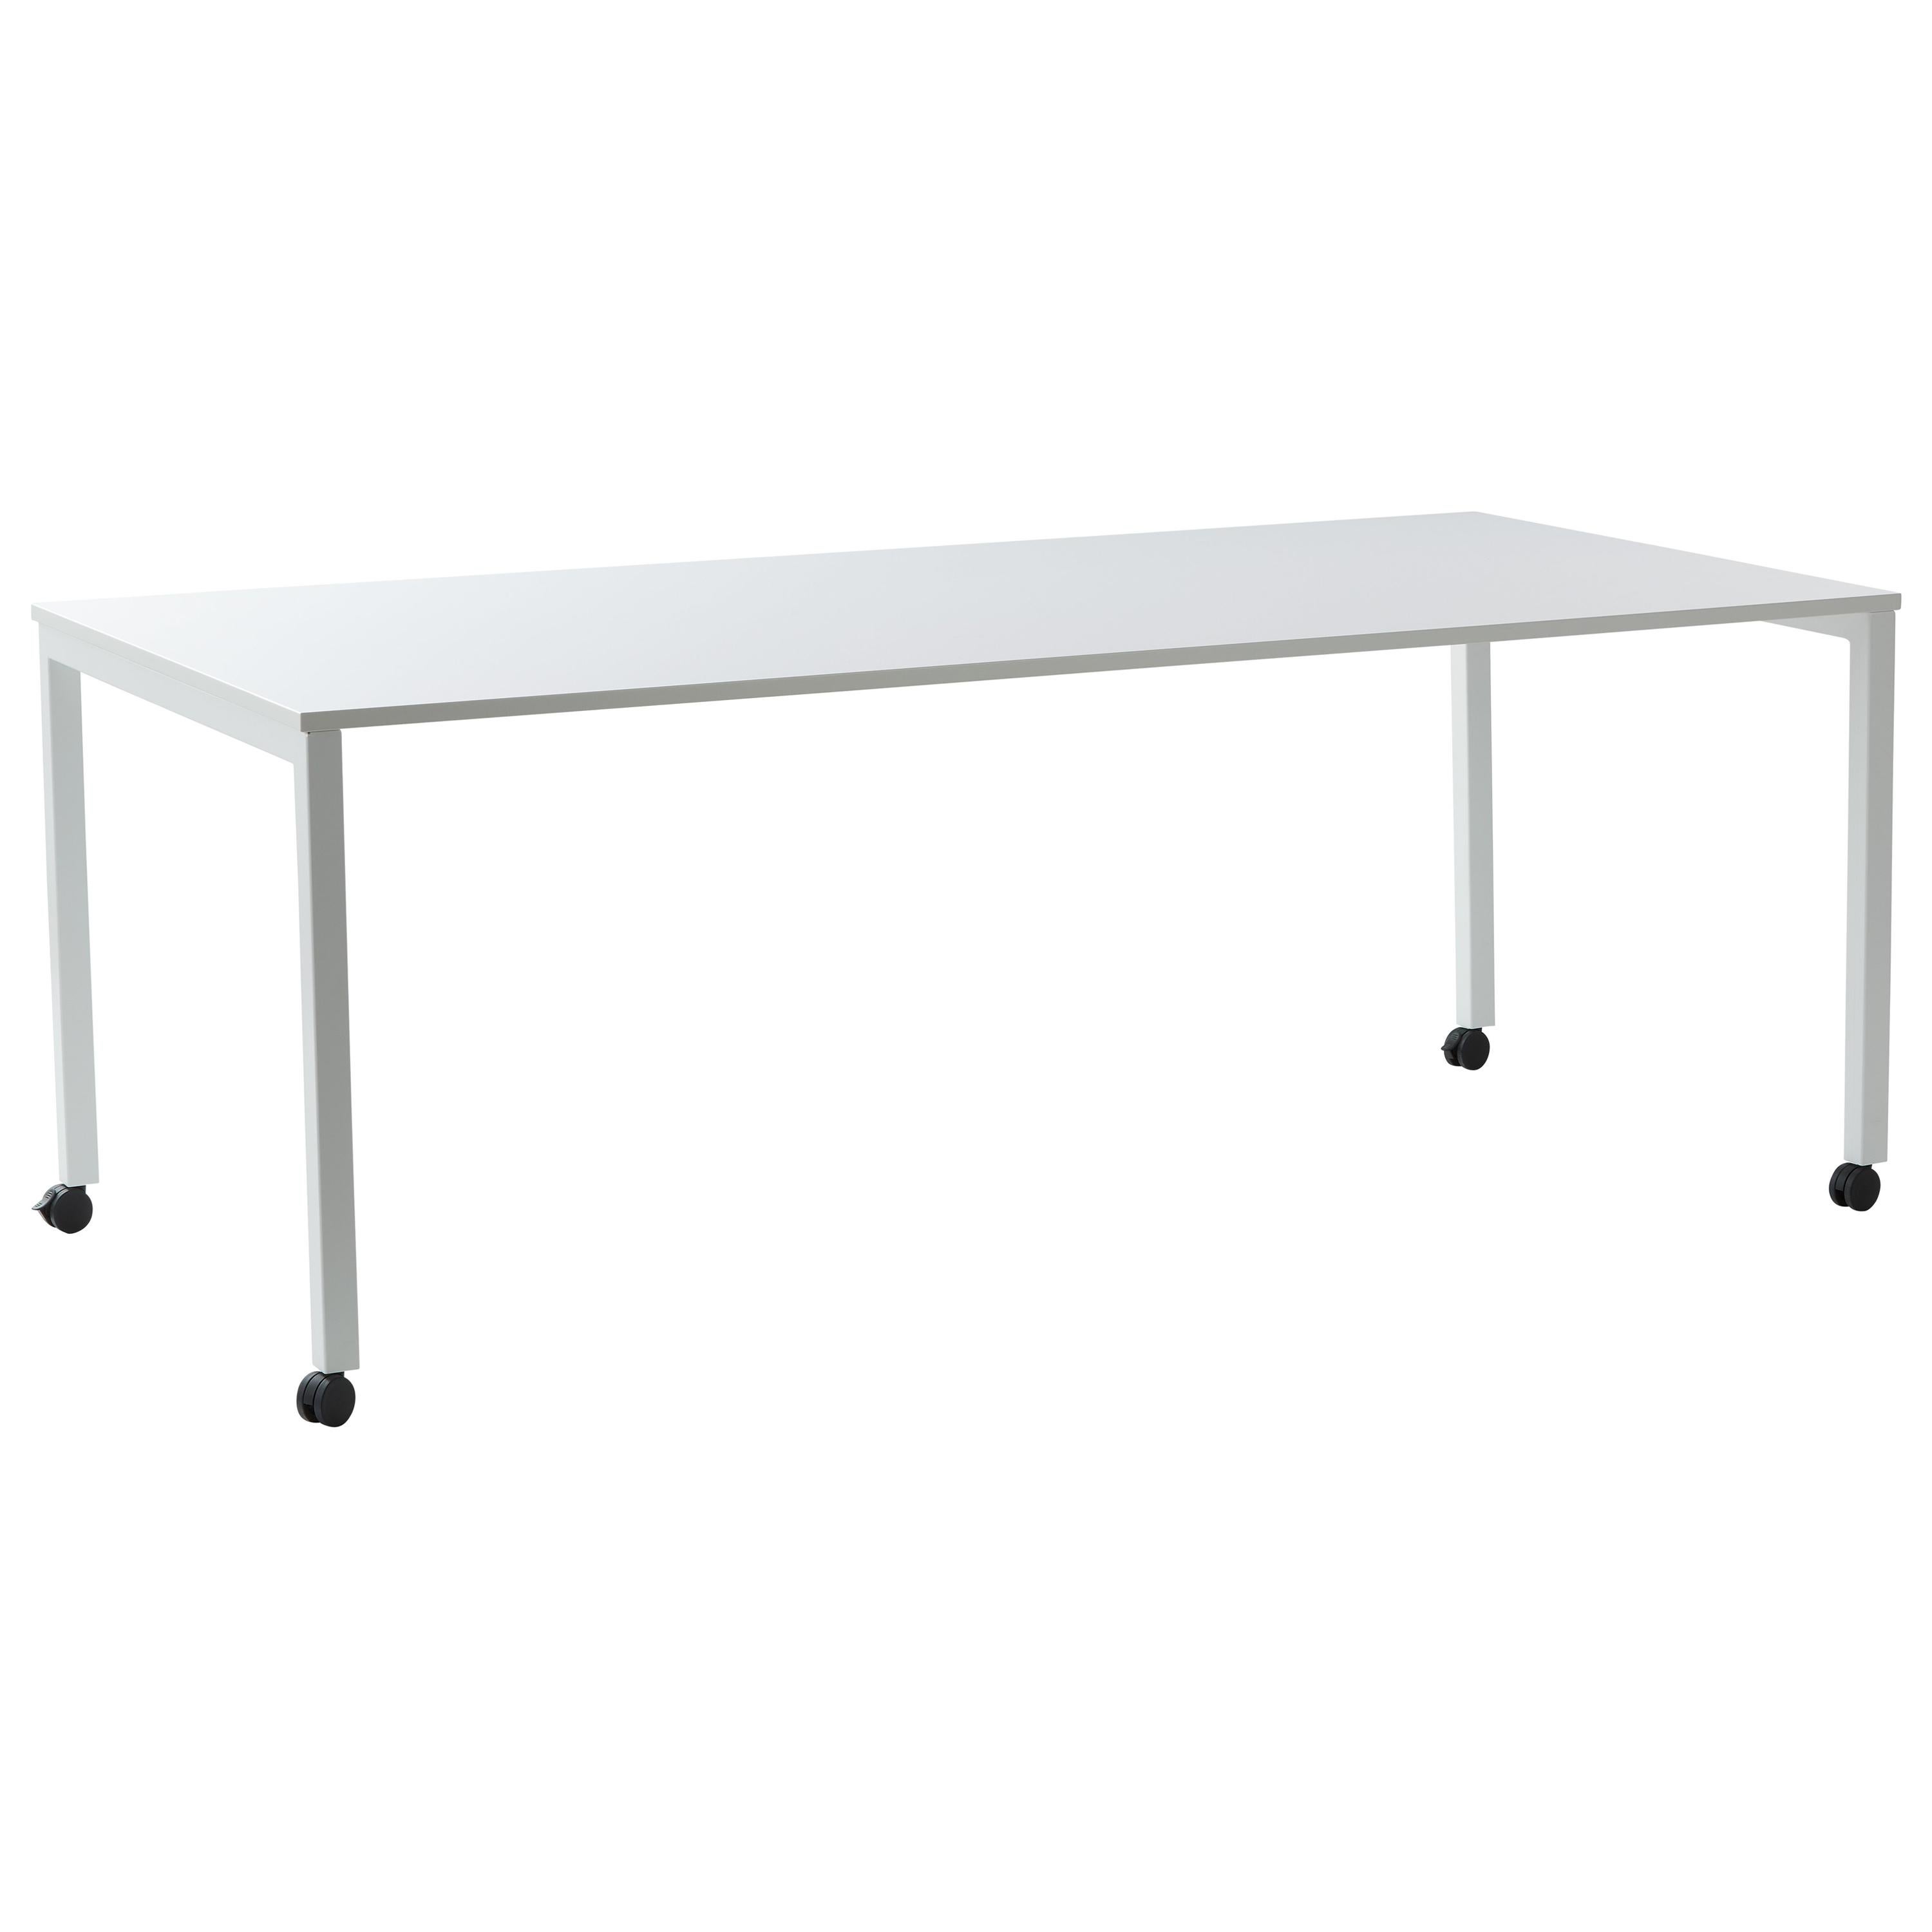 Panton Move Dining Table in White by Verner Panton